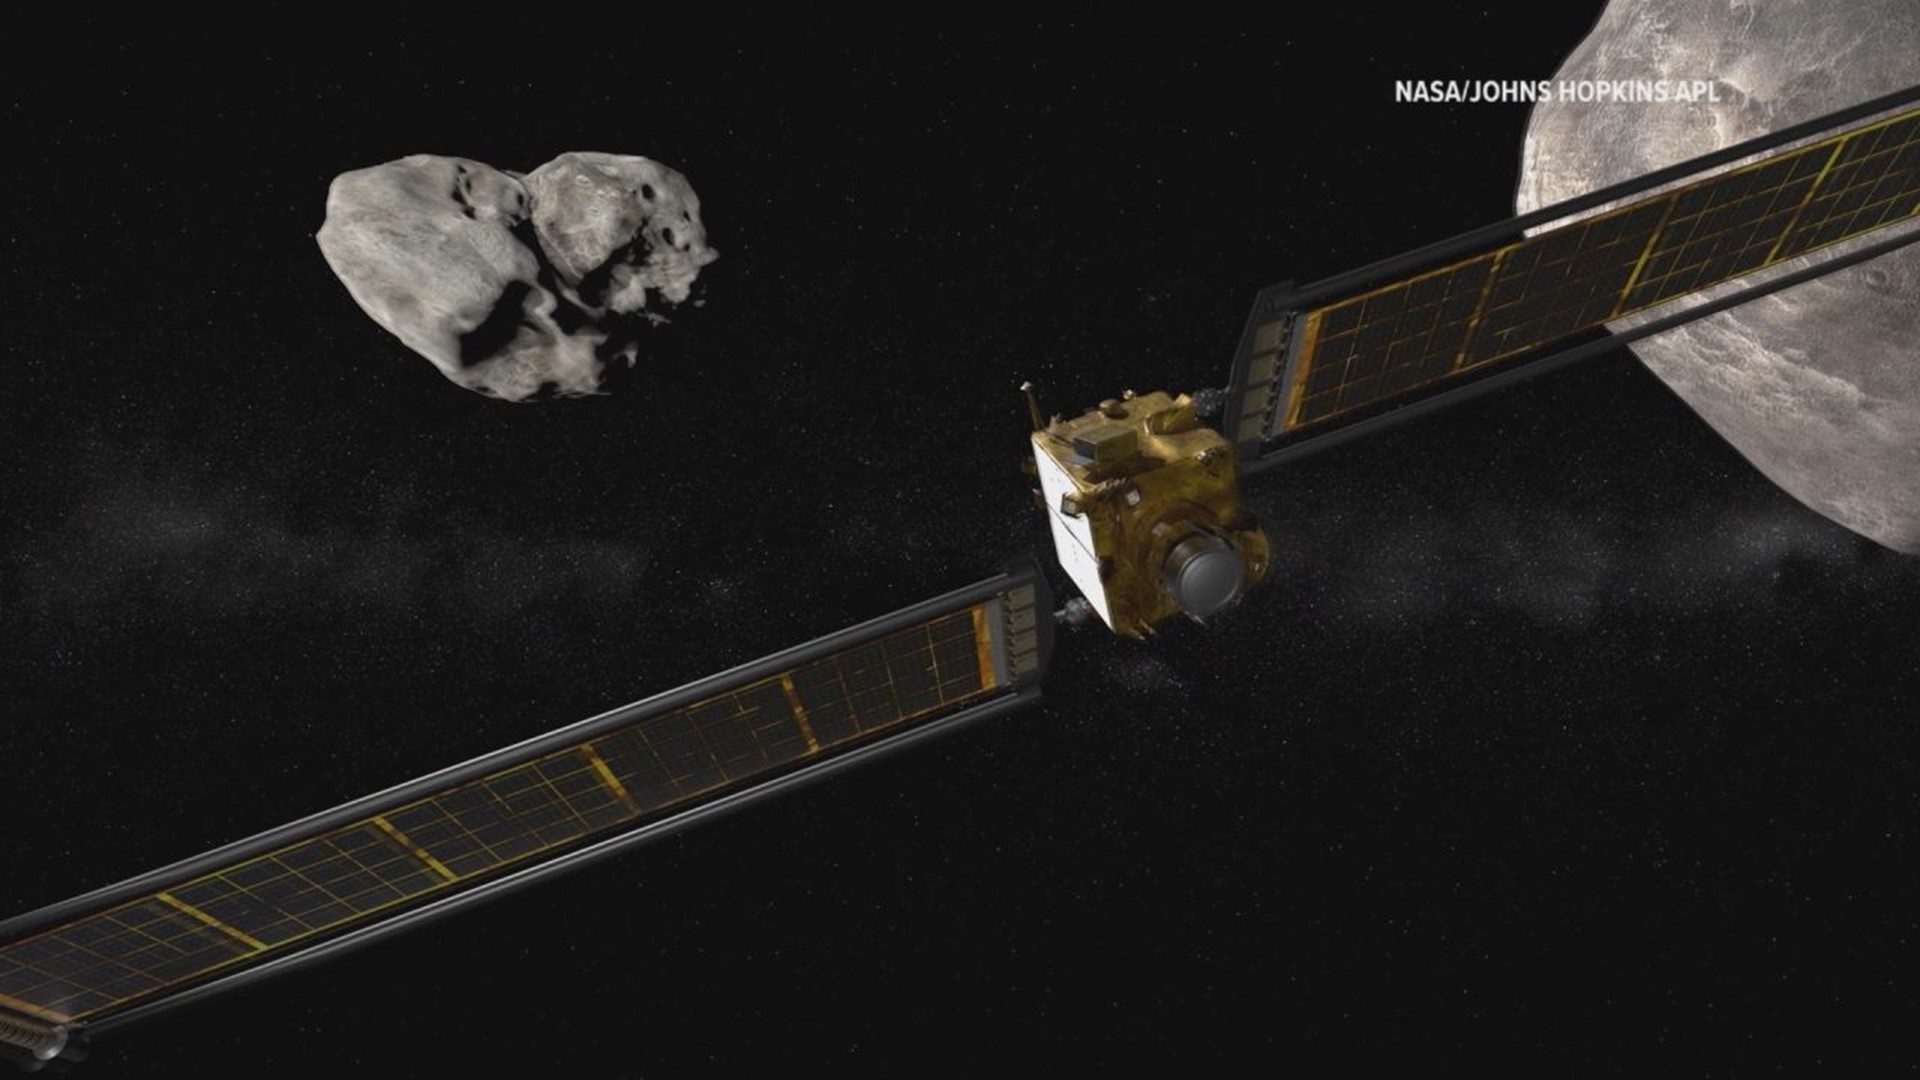 The DART spacecraft, launching Wednesday at 1:21 a.m. EST, is aiming to redirect an asteroid as a test of NASA's planetary defense capabilities.